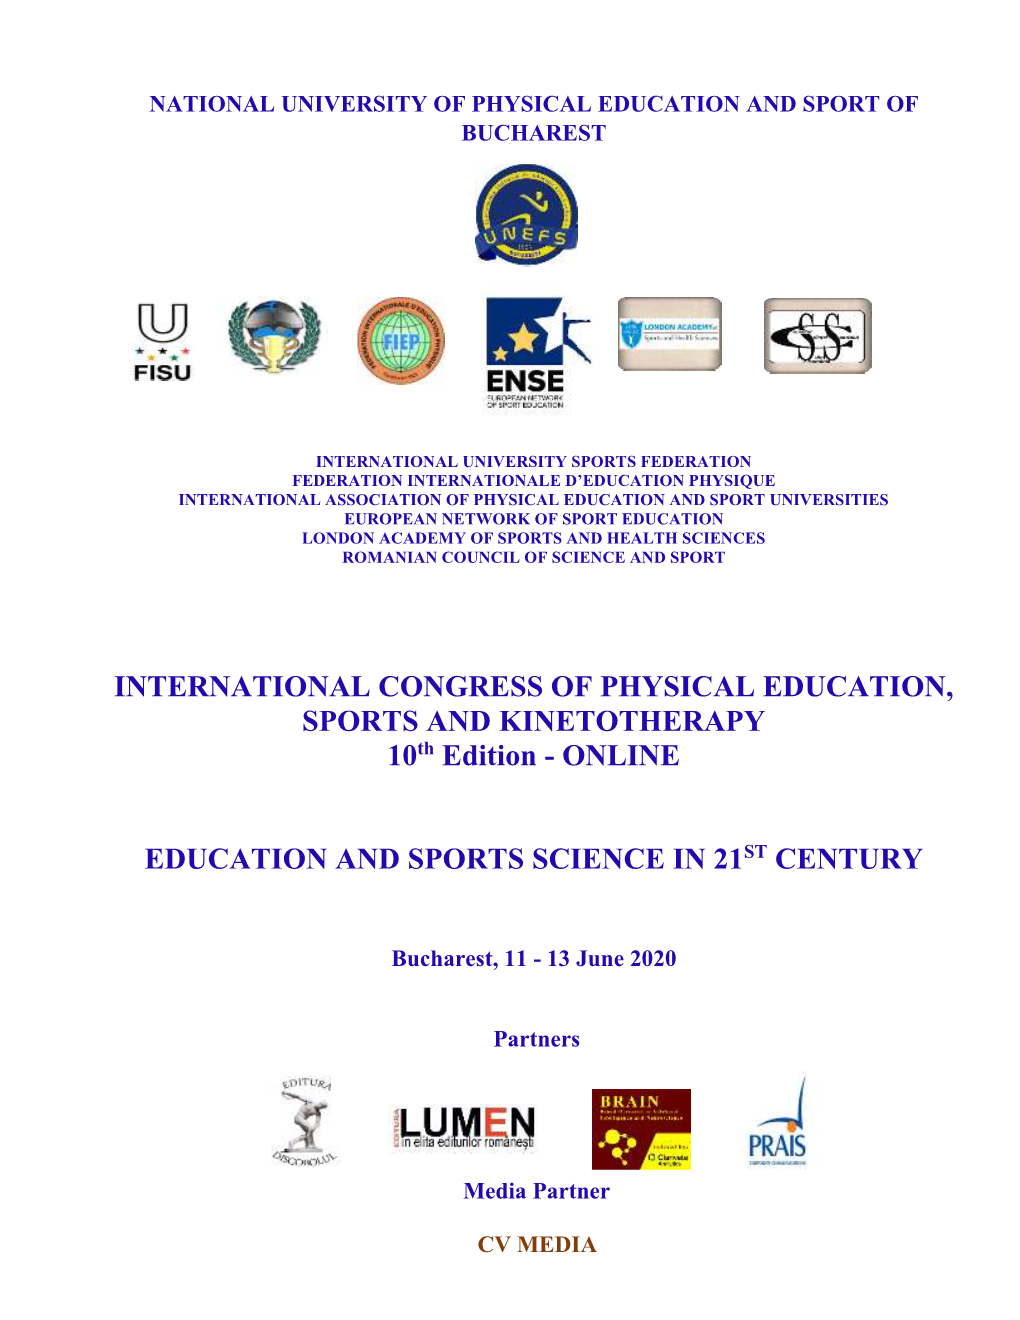 INTERNATIONAL CONGRESS of PHYSICAL EDUCATION, SPORTS and KINETOTHERAPY 10Th Edition - ONLINE